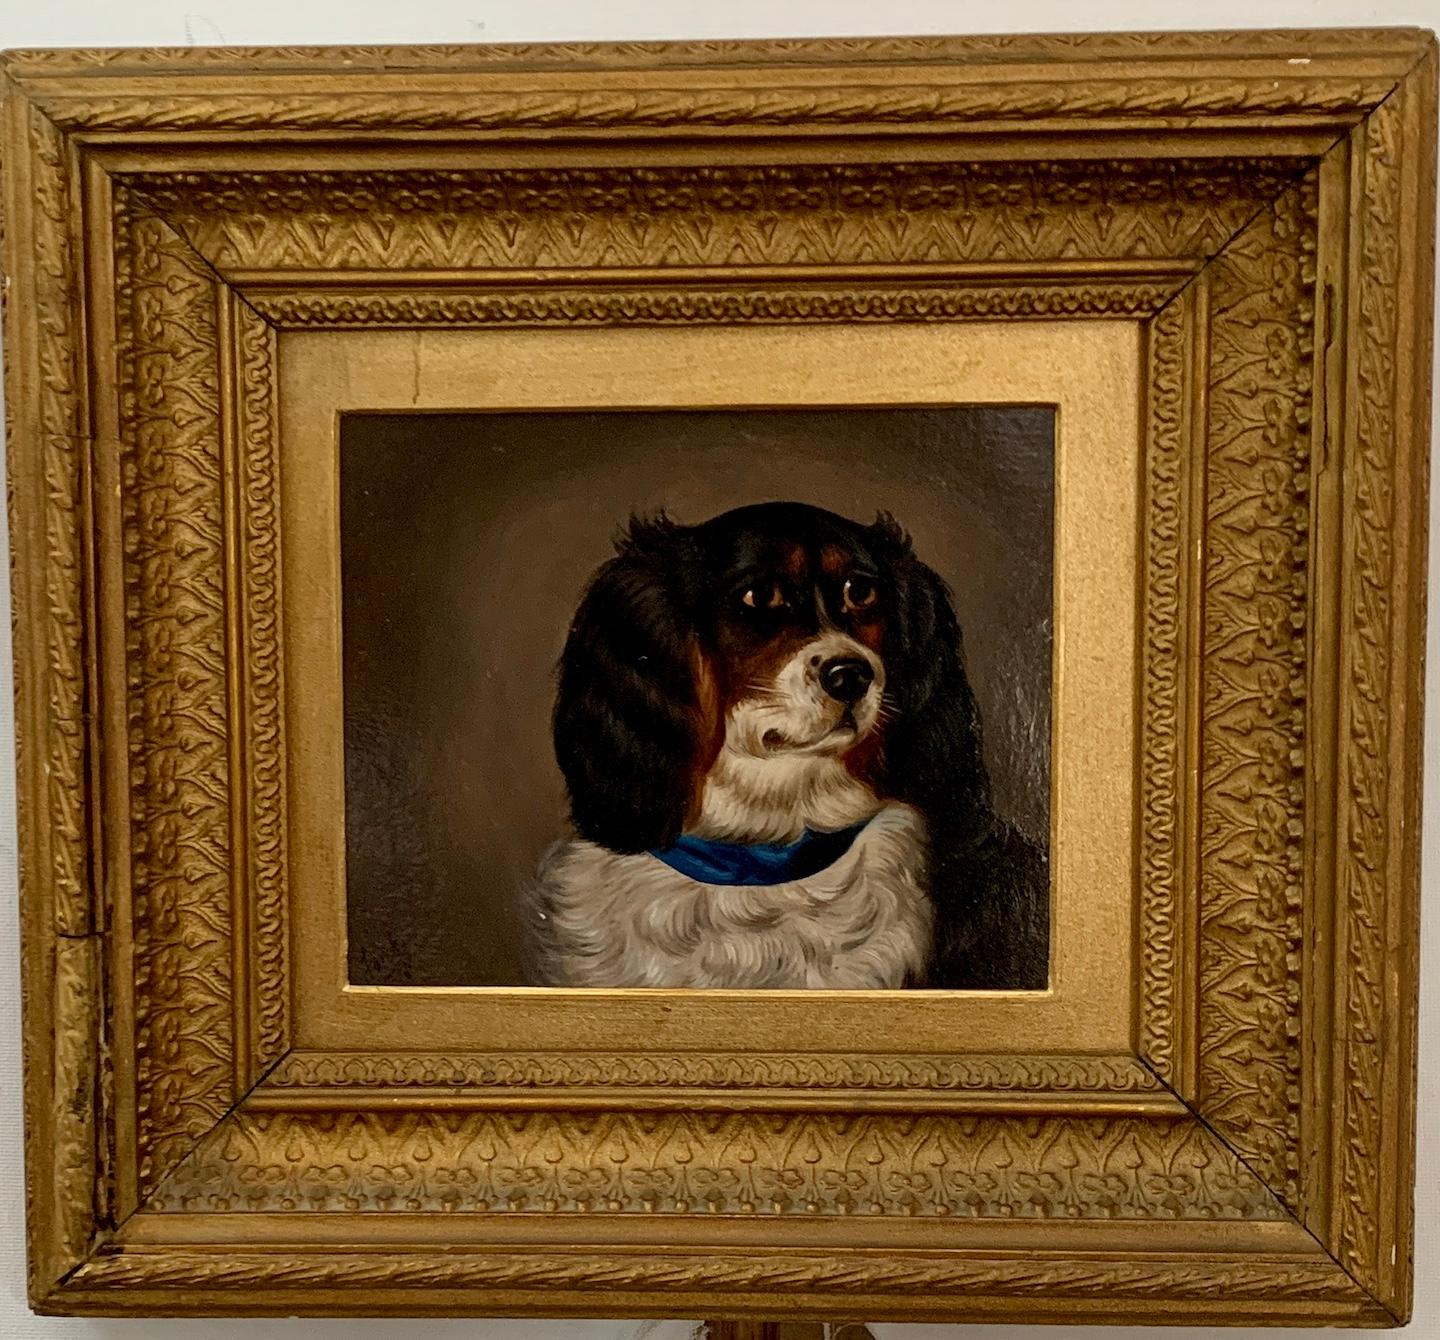 Edwin Loder Figurative Painting - 19th century English Antique Portrait of a King Charles Cavalier dog spaniel